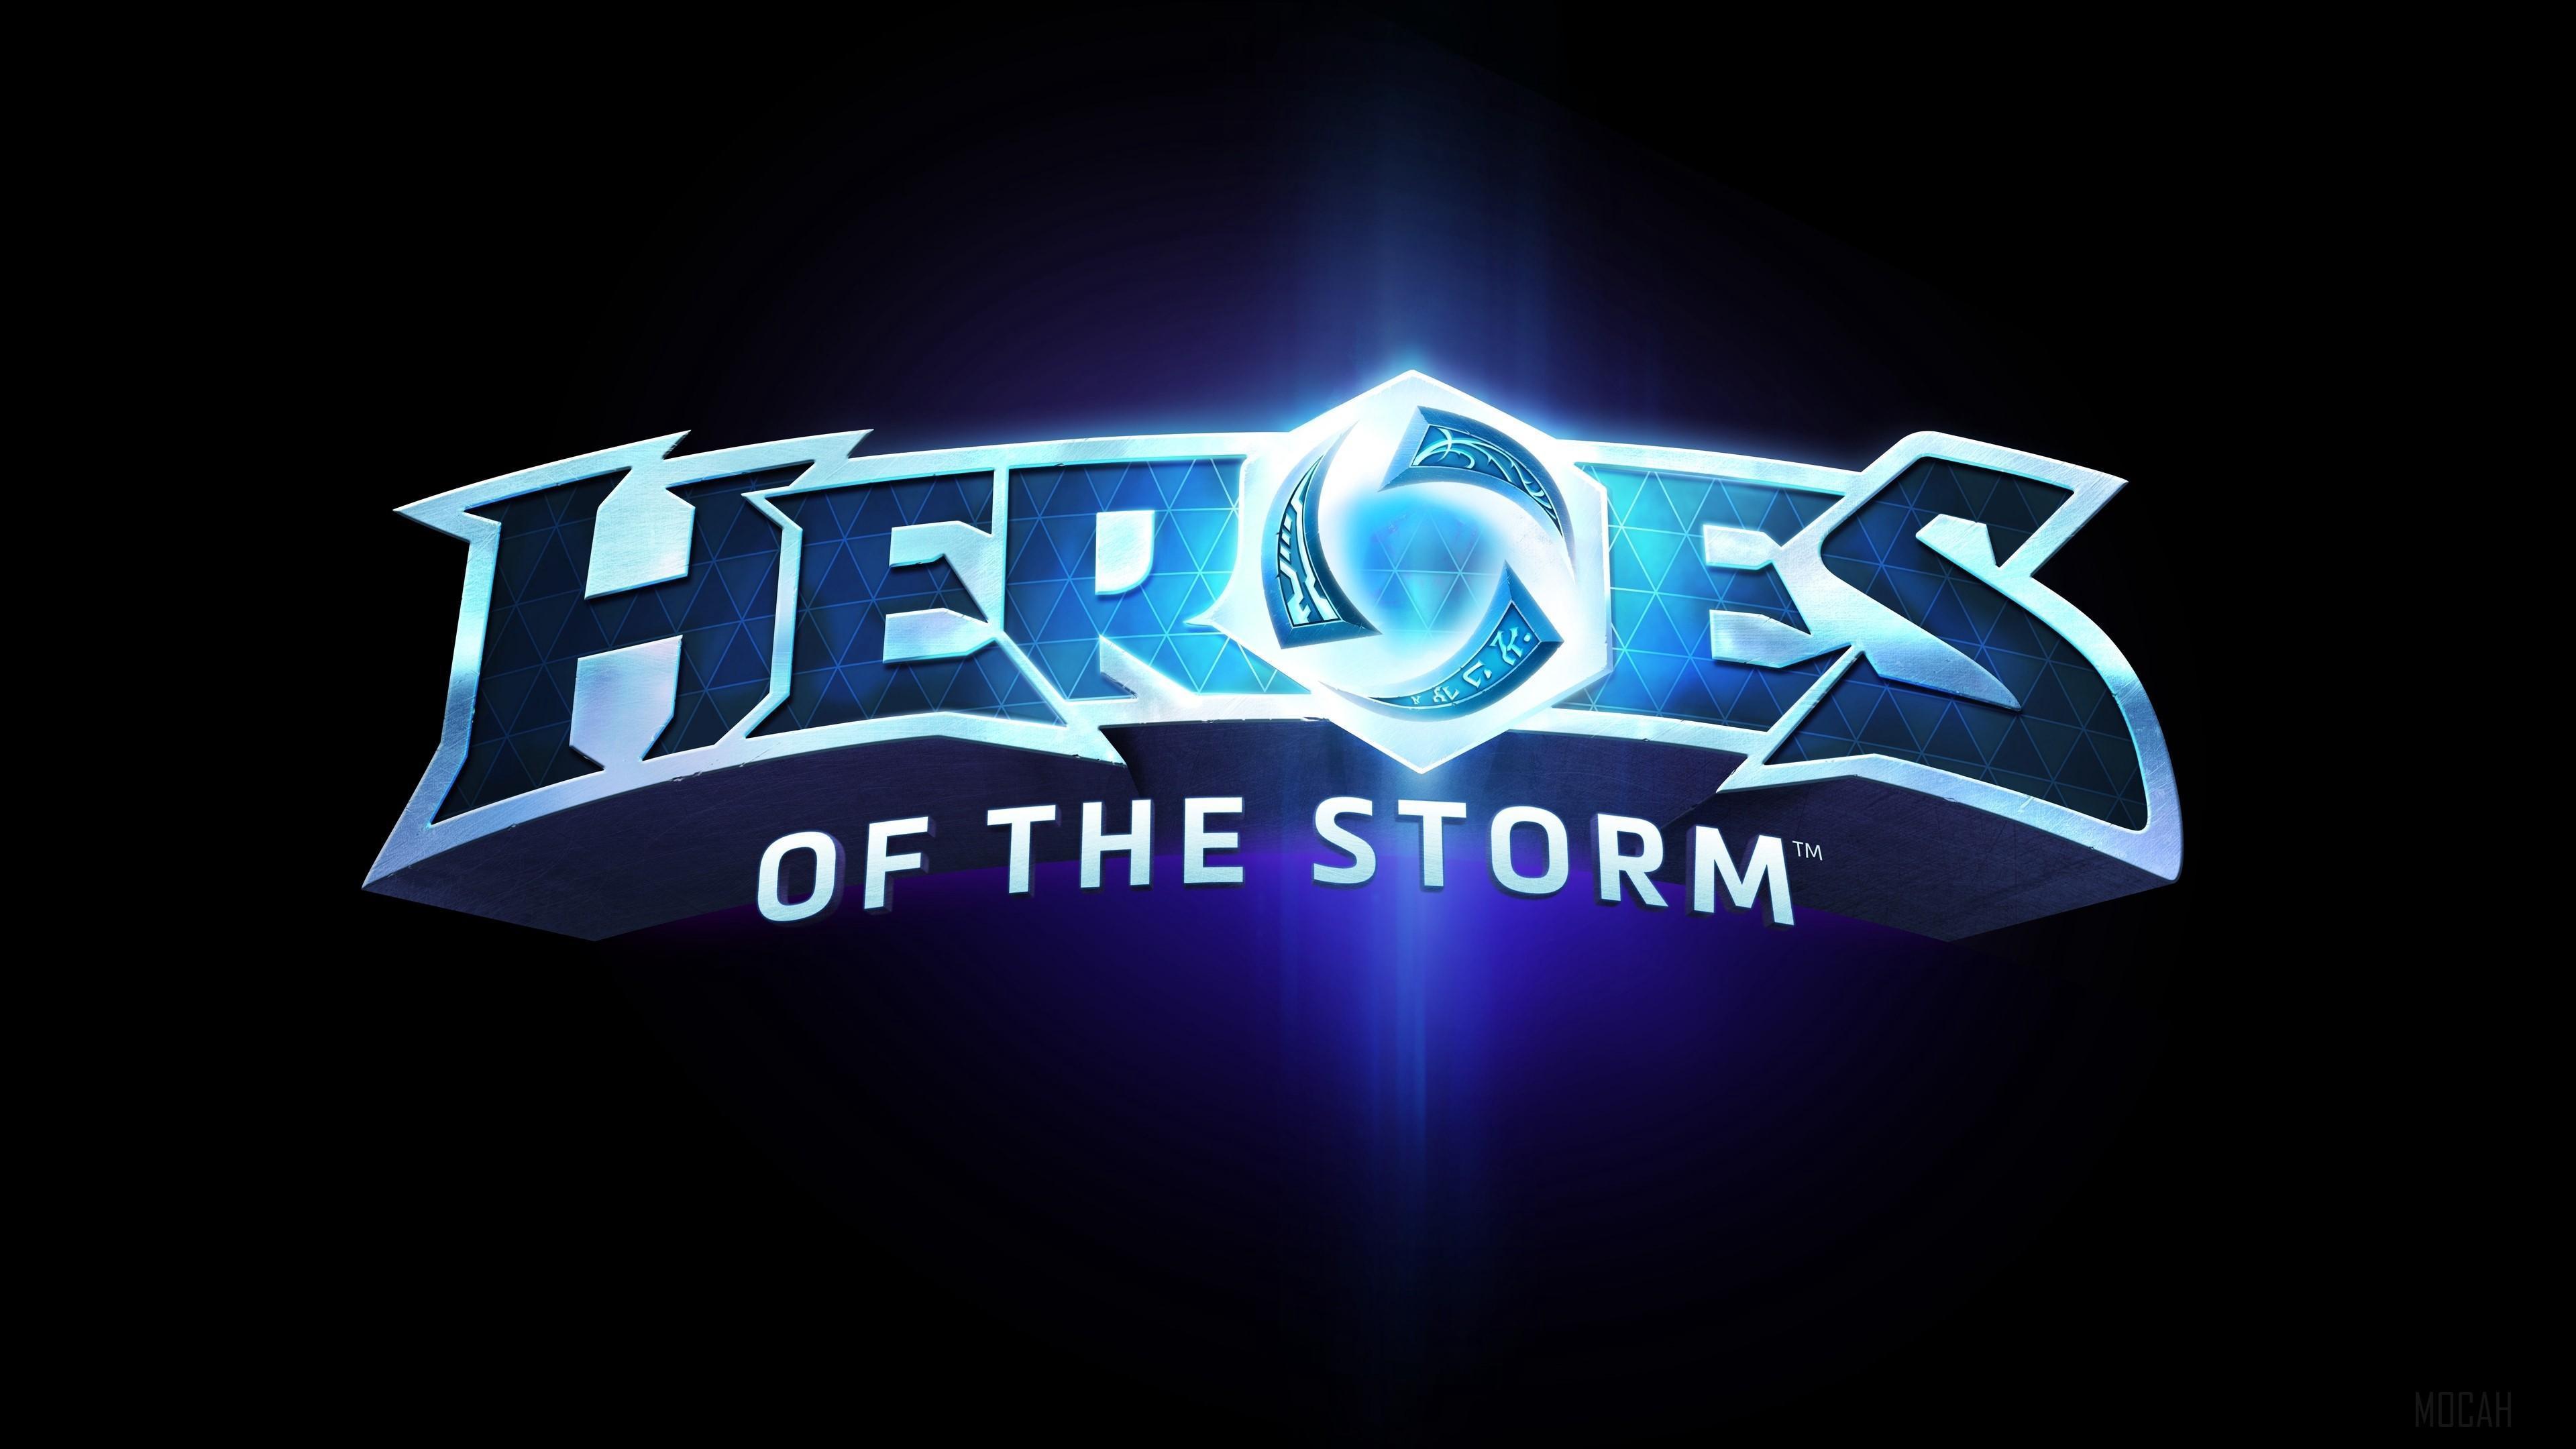 HD wallpaper, Heroes Of The Storm, Blizzard Entertainment, Blue, Logo 4K